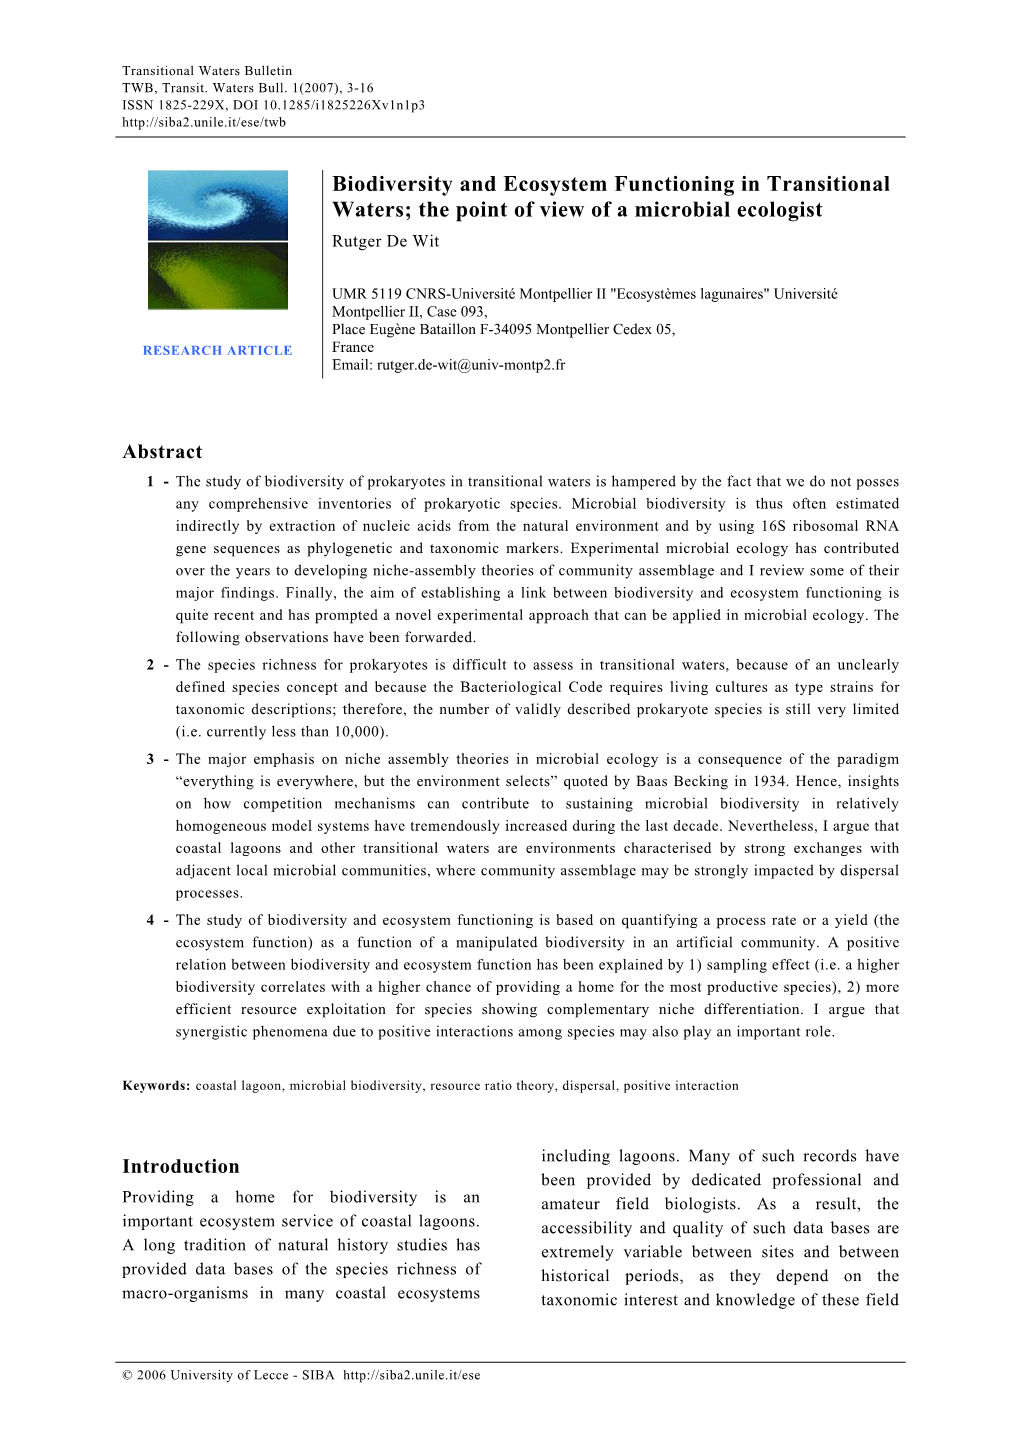 Biodiversity and Ecosystem Functioning in Transitional Waters; the Point of View of a Microbial Ecologist Rutger De Wit